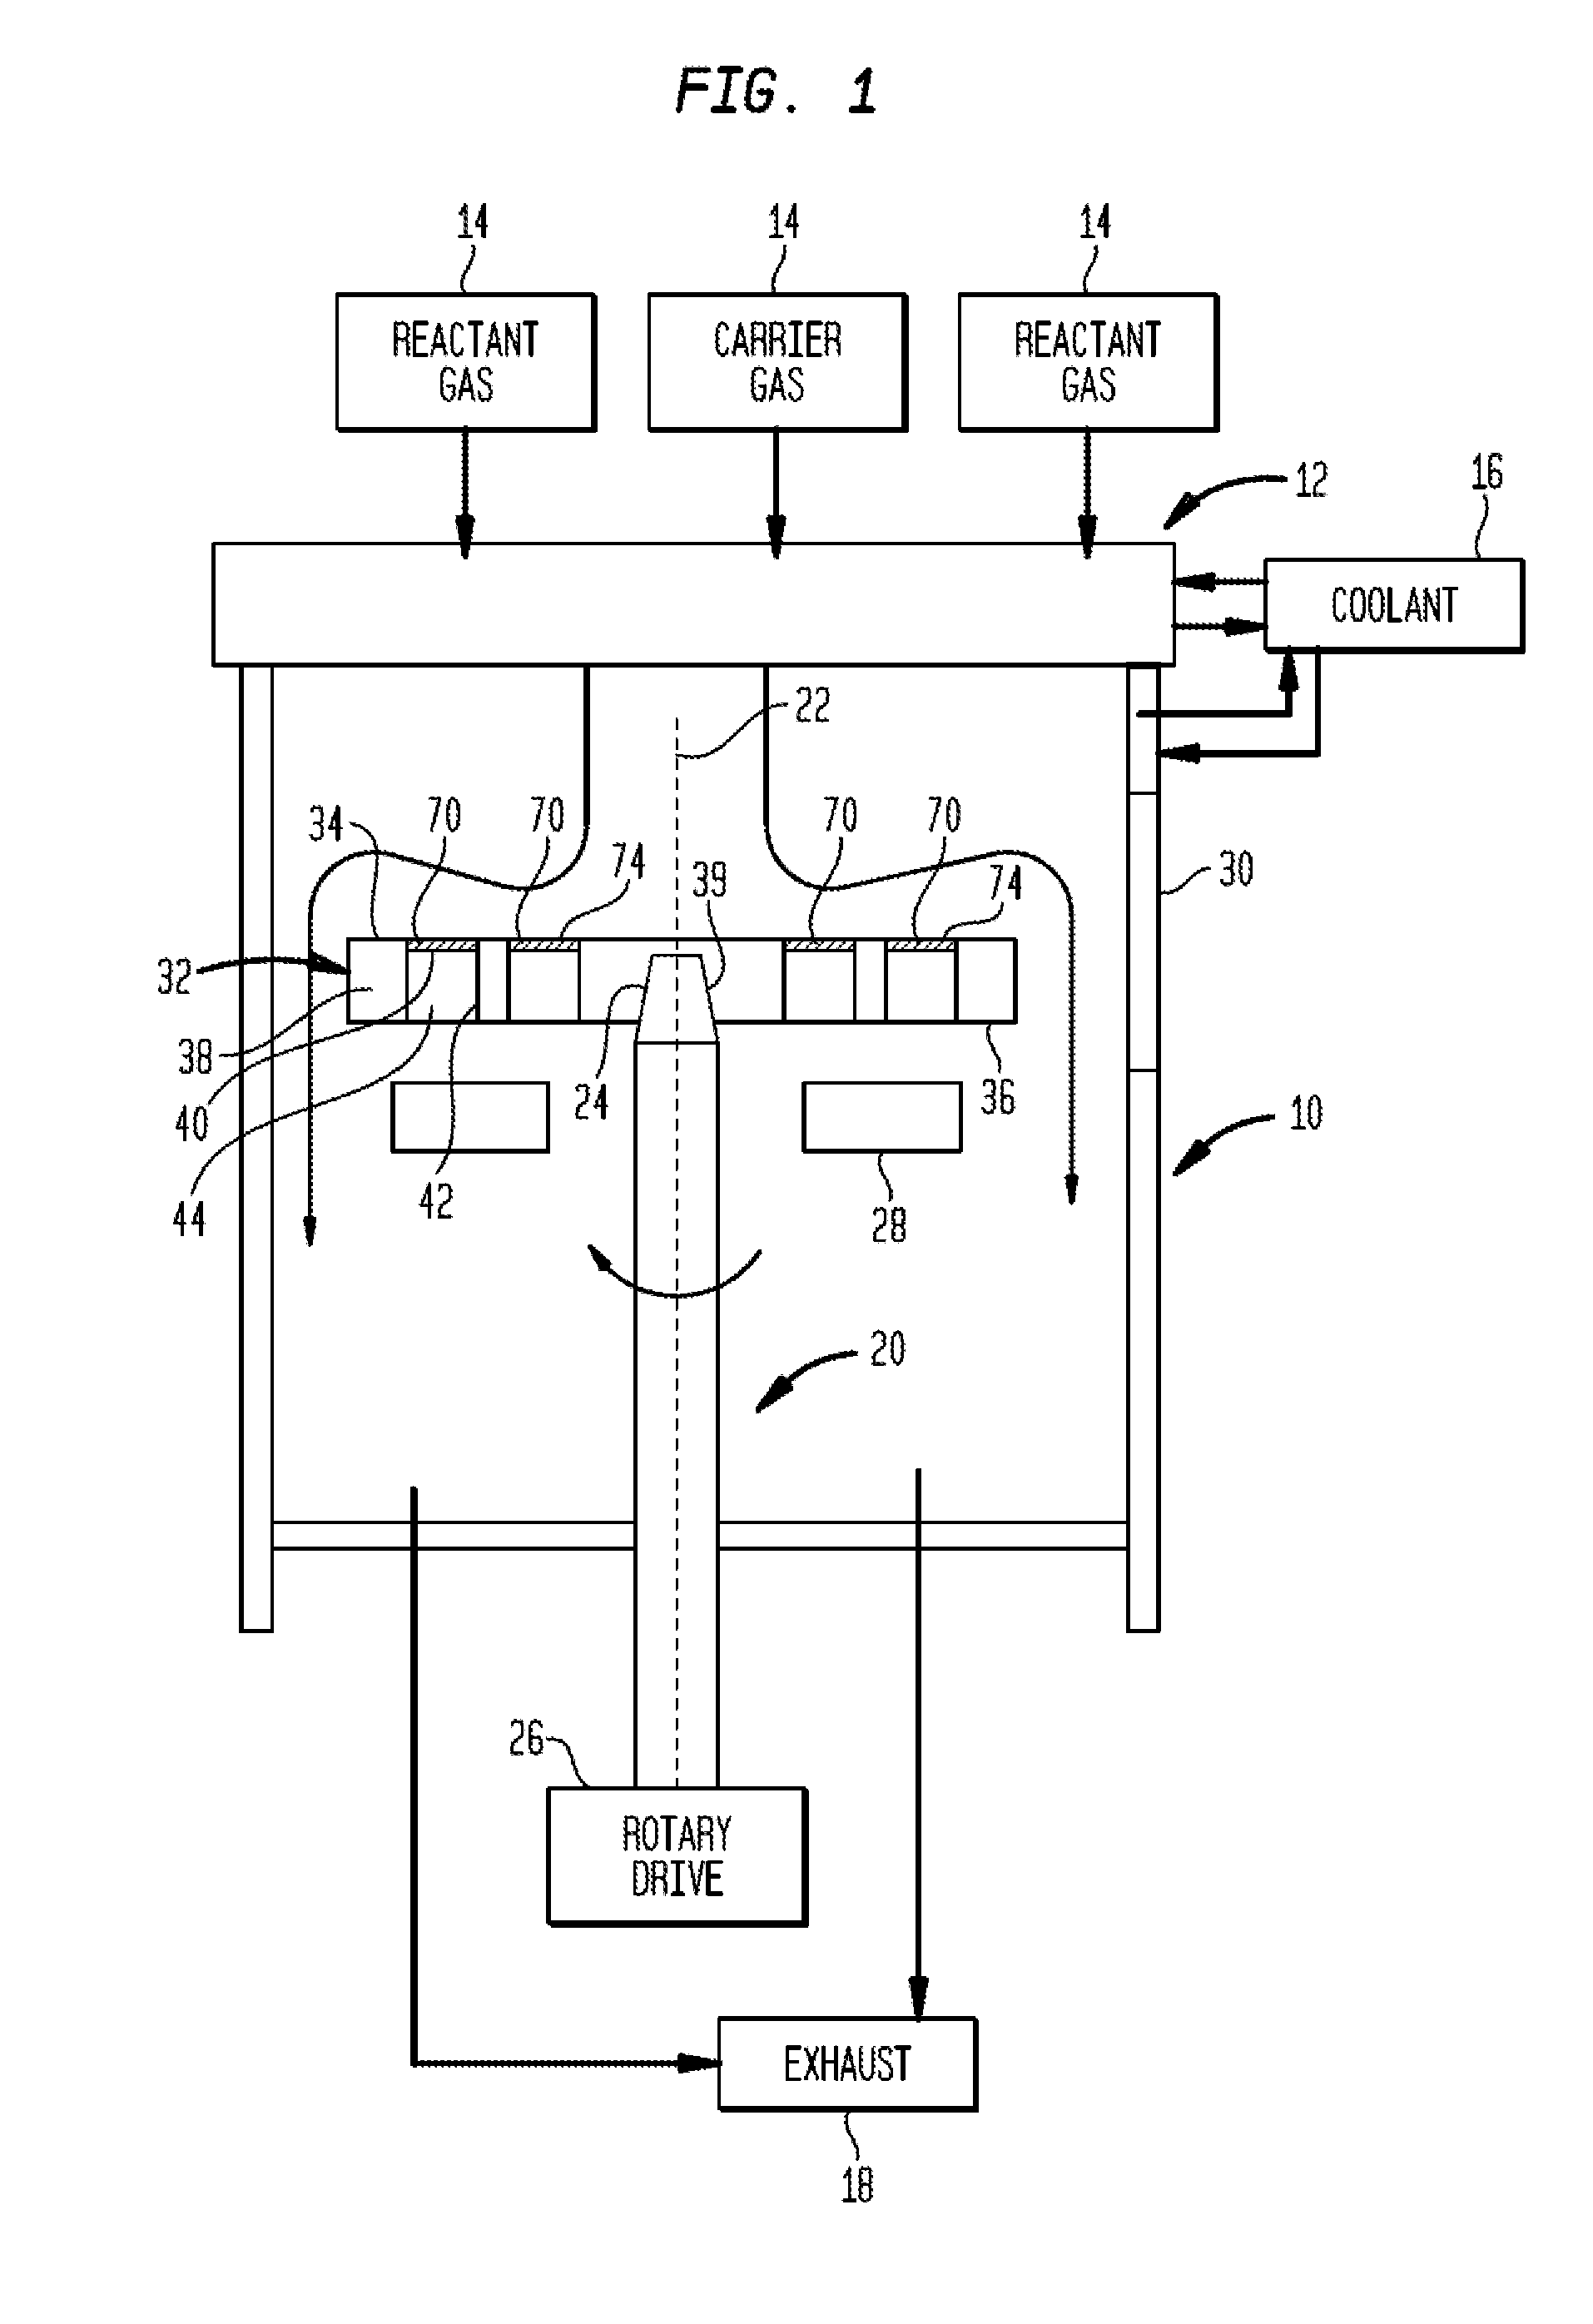 Wafer carrier having thermal uniformity-enhancing features